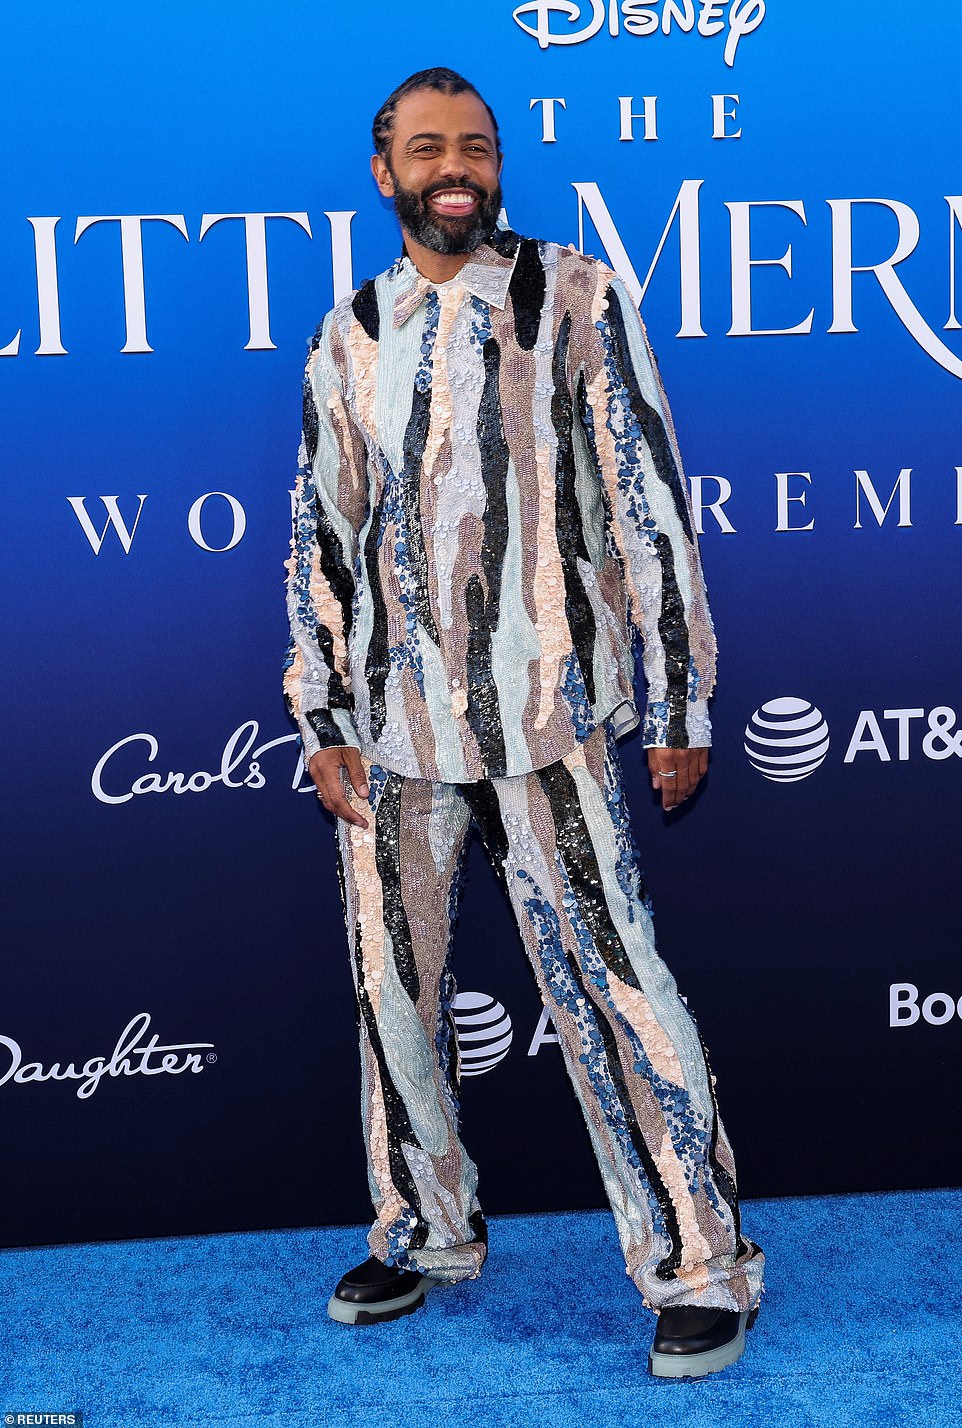 Daveed Diggs turned heads in an eccentric suit bedazzled with waves of color